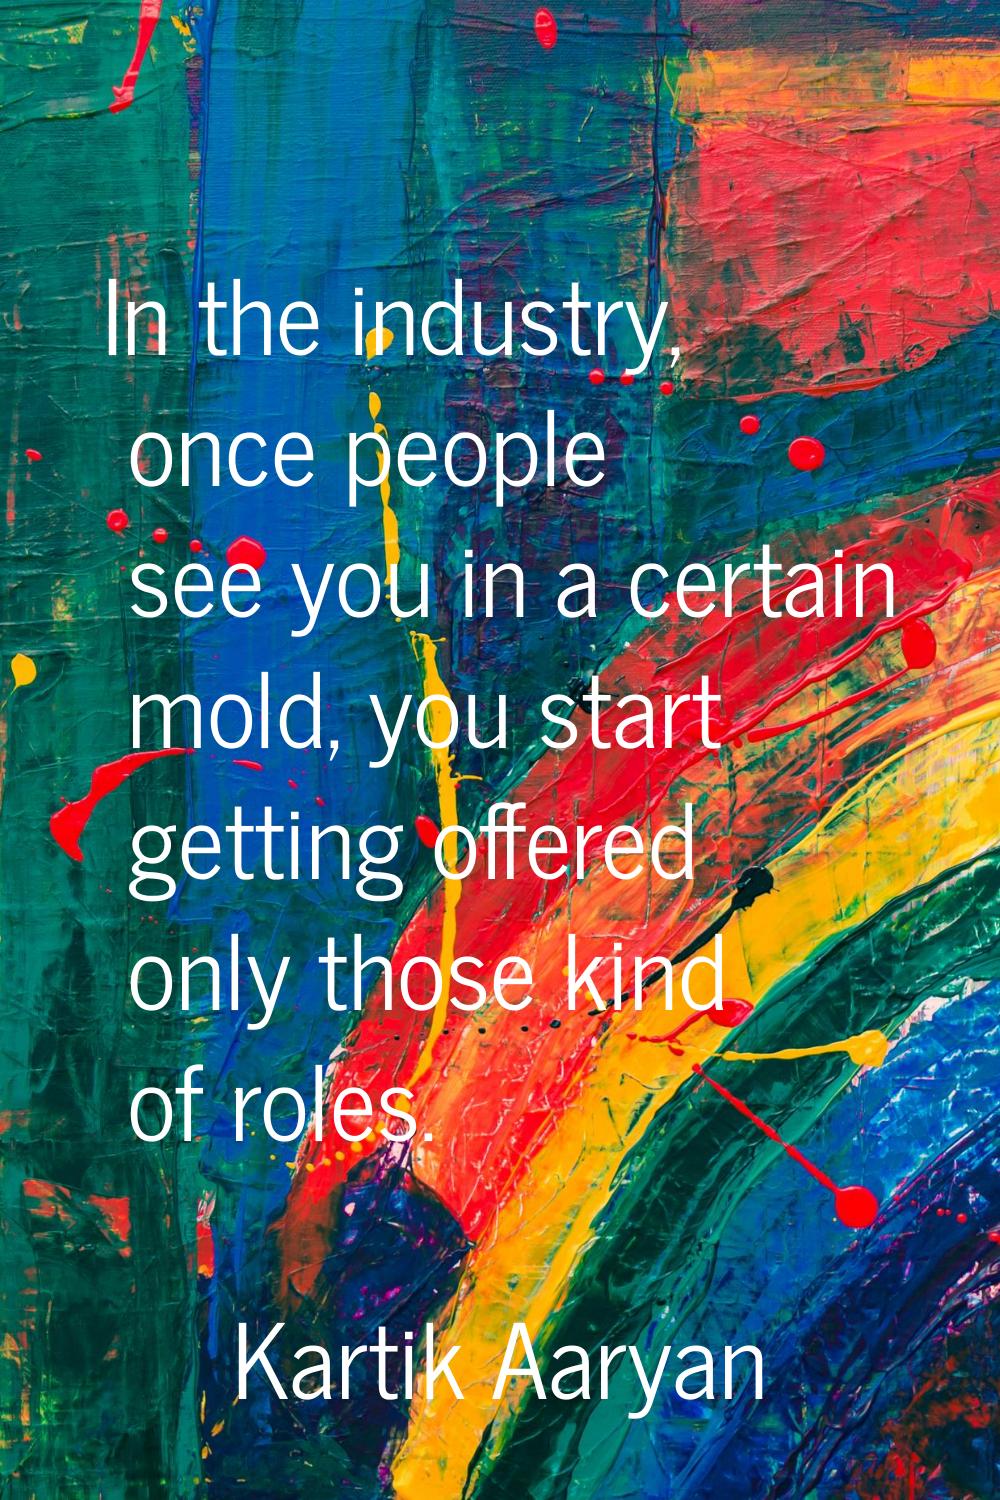 In the industry, once people see you in a certain mold, you start getting offered only those kind o